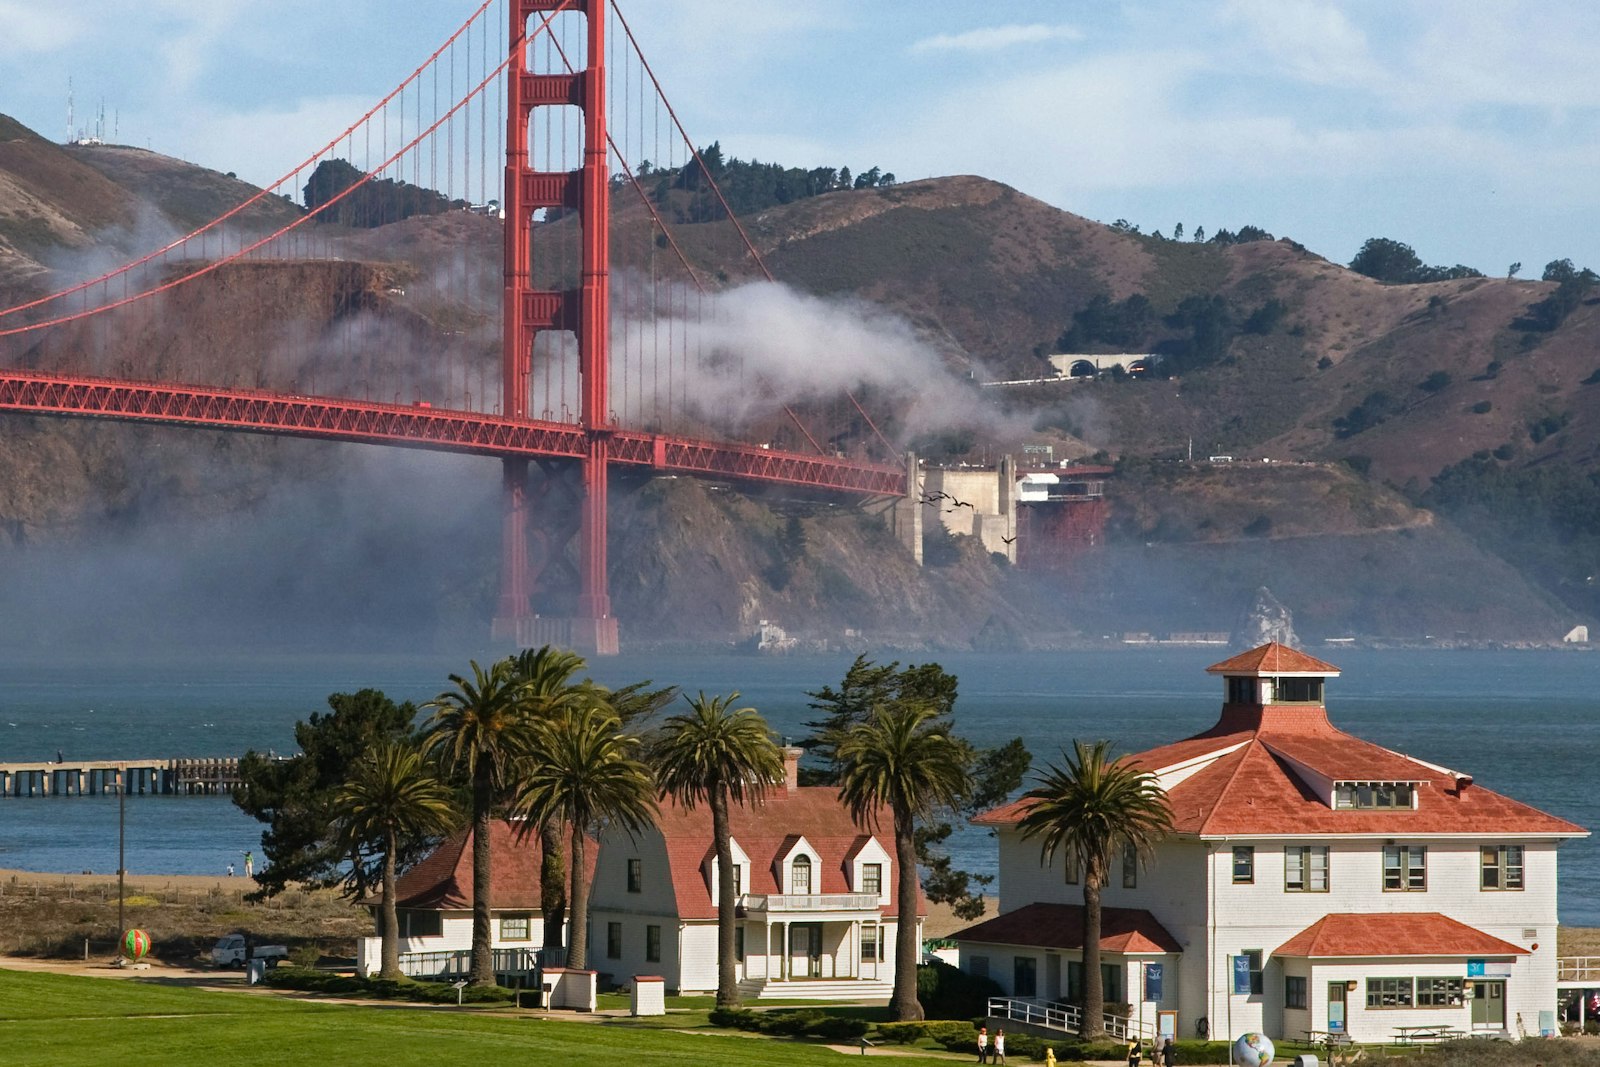 Presidio of San Francisco with the Golden Gate bridge in the background